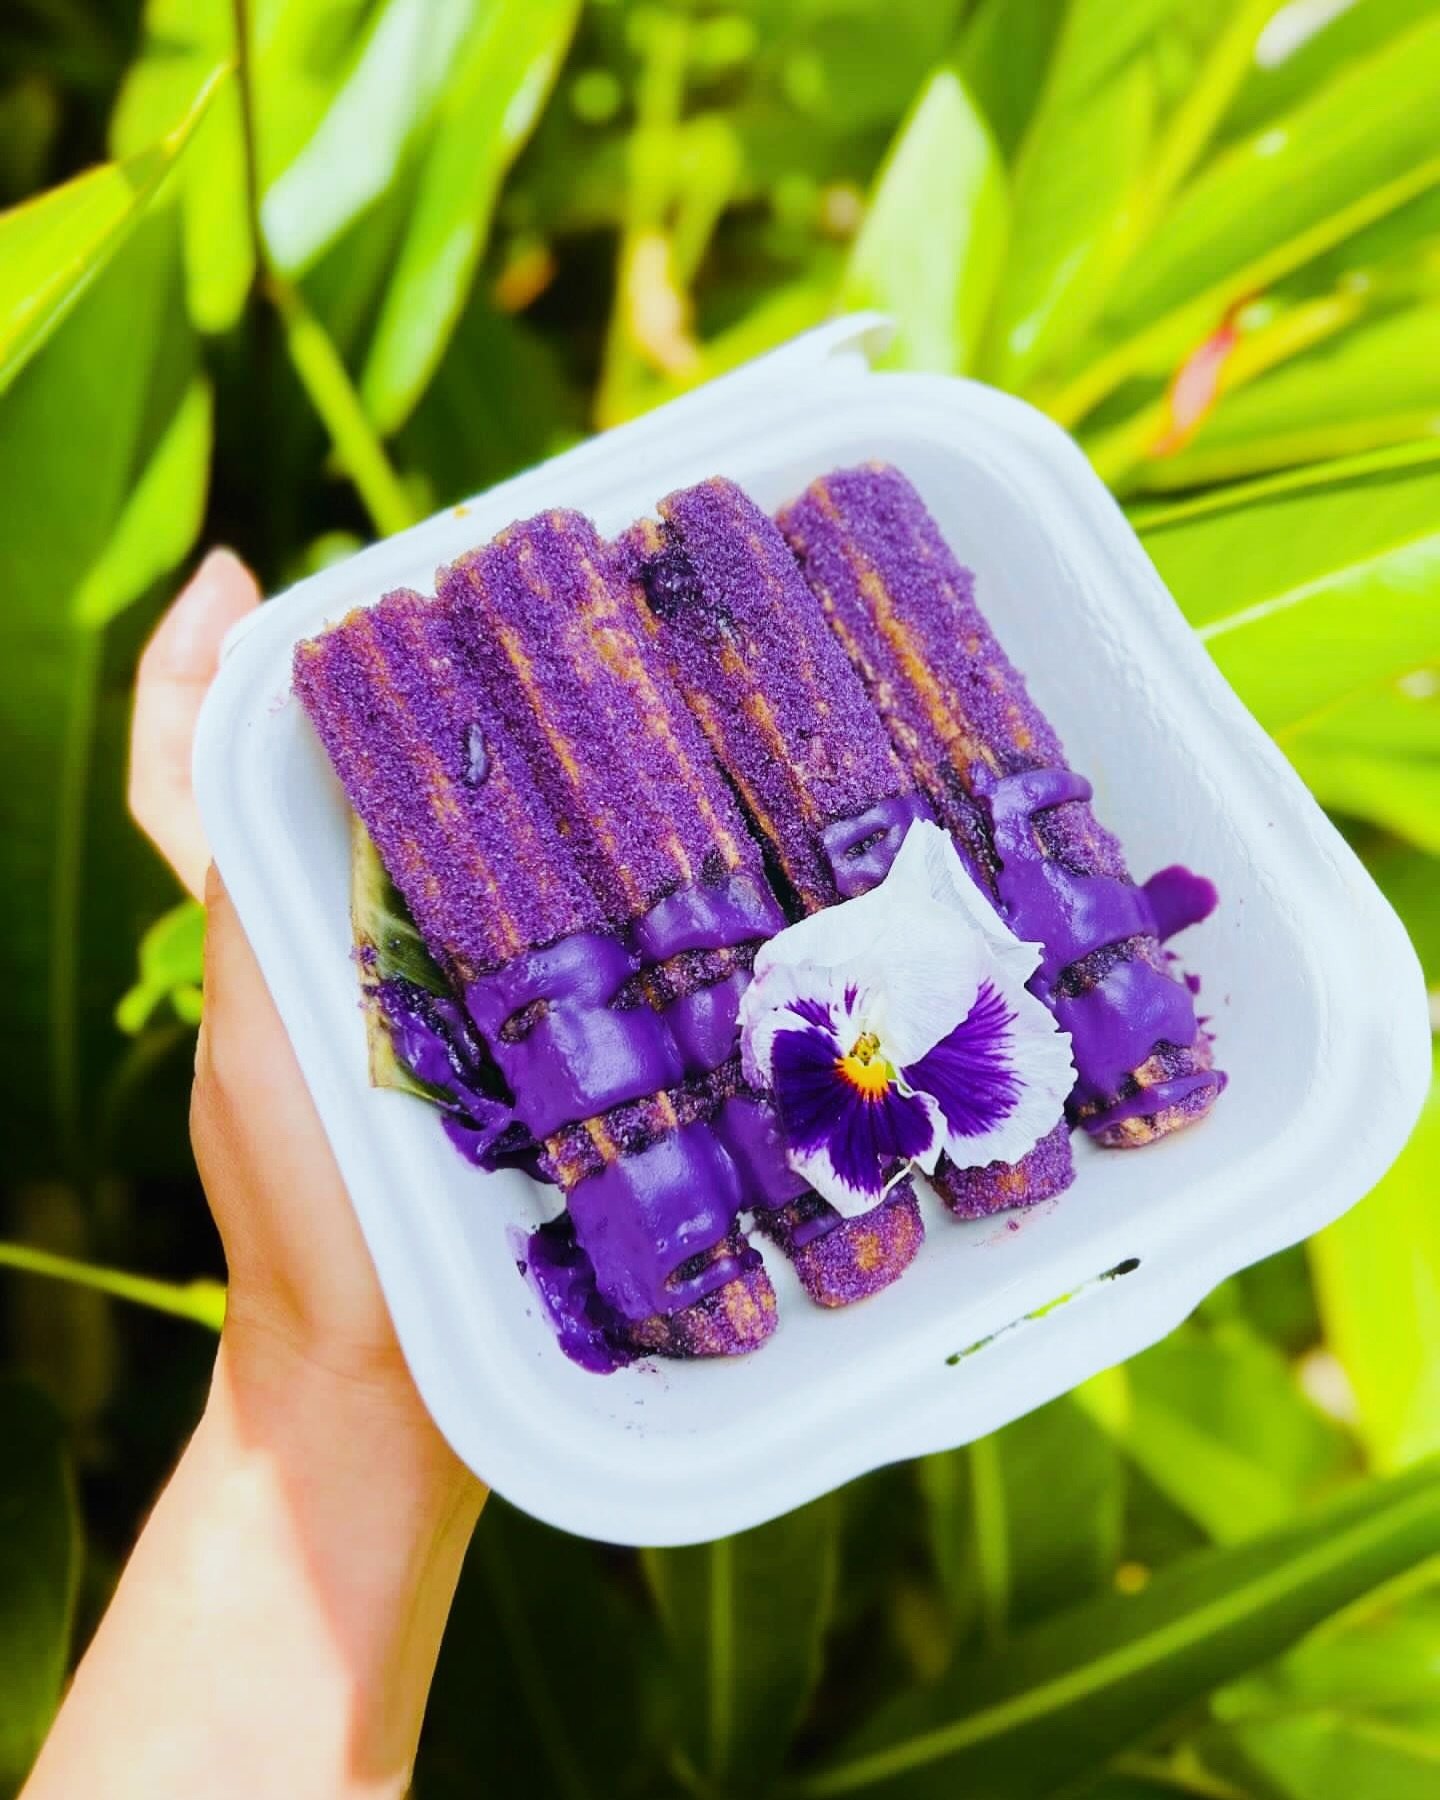 &ldquo;🌟✨ It&rsquo;s Minasa Weekend! 🌟✨ Join us for some purple love with our delicious Ube Churros! 💜✨ Open today from 12pm-4pm and this Sunday from 10am-2pm. Call 808-629-9958 to place your order. See you soon! 🌈🍴 #UbeChurros #WeekendVibes #Mi